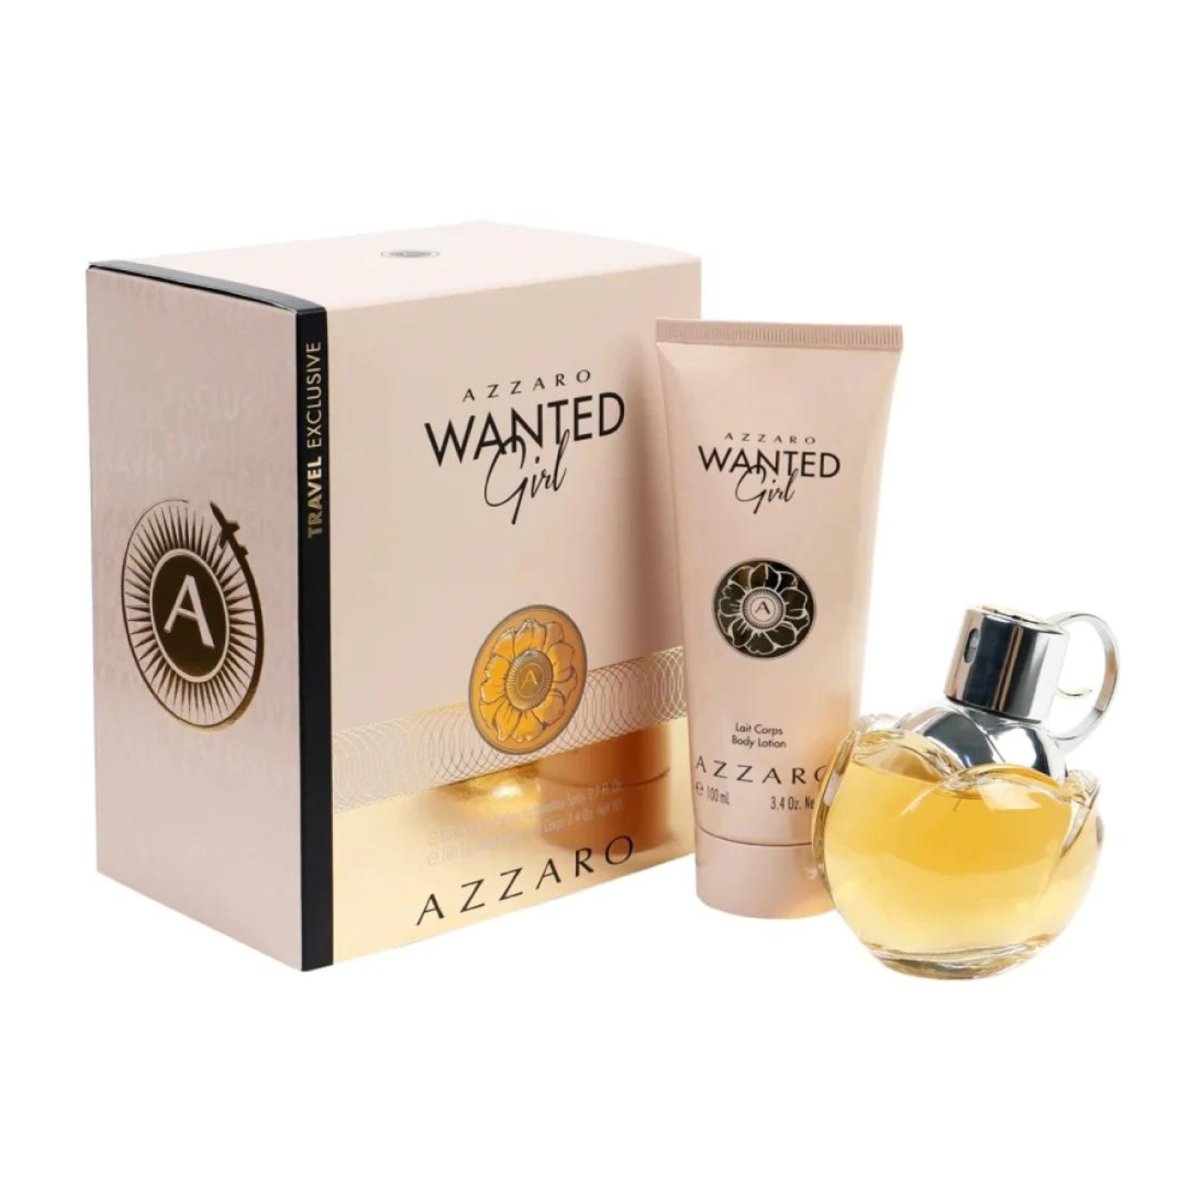 Chic Azzaro Wanted Girl fragrance collection, showcasing a unique floral-inspired perfume bottle next to a sleek body lotion, in a luxurious package - Azzaro - -